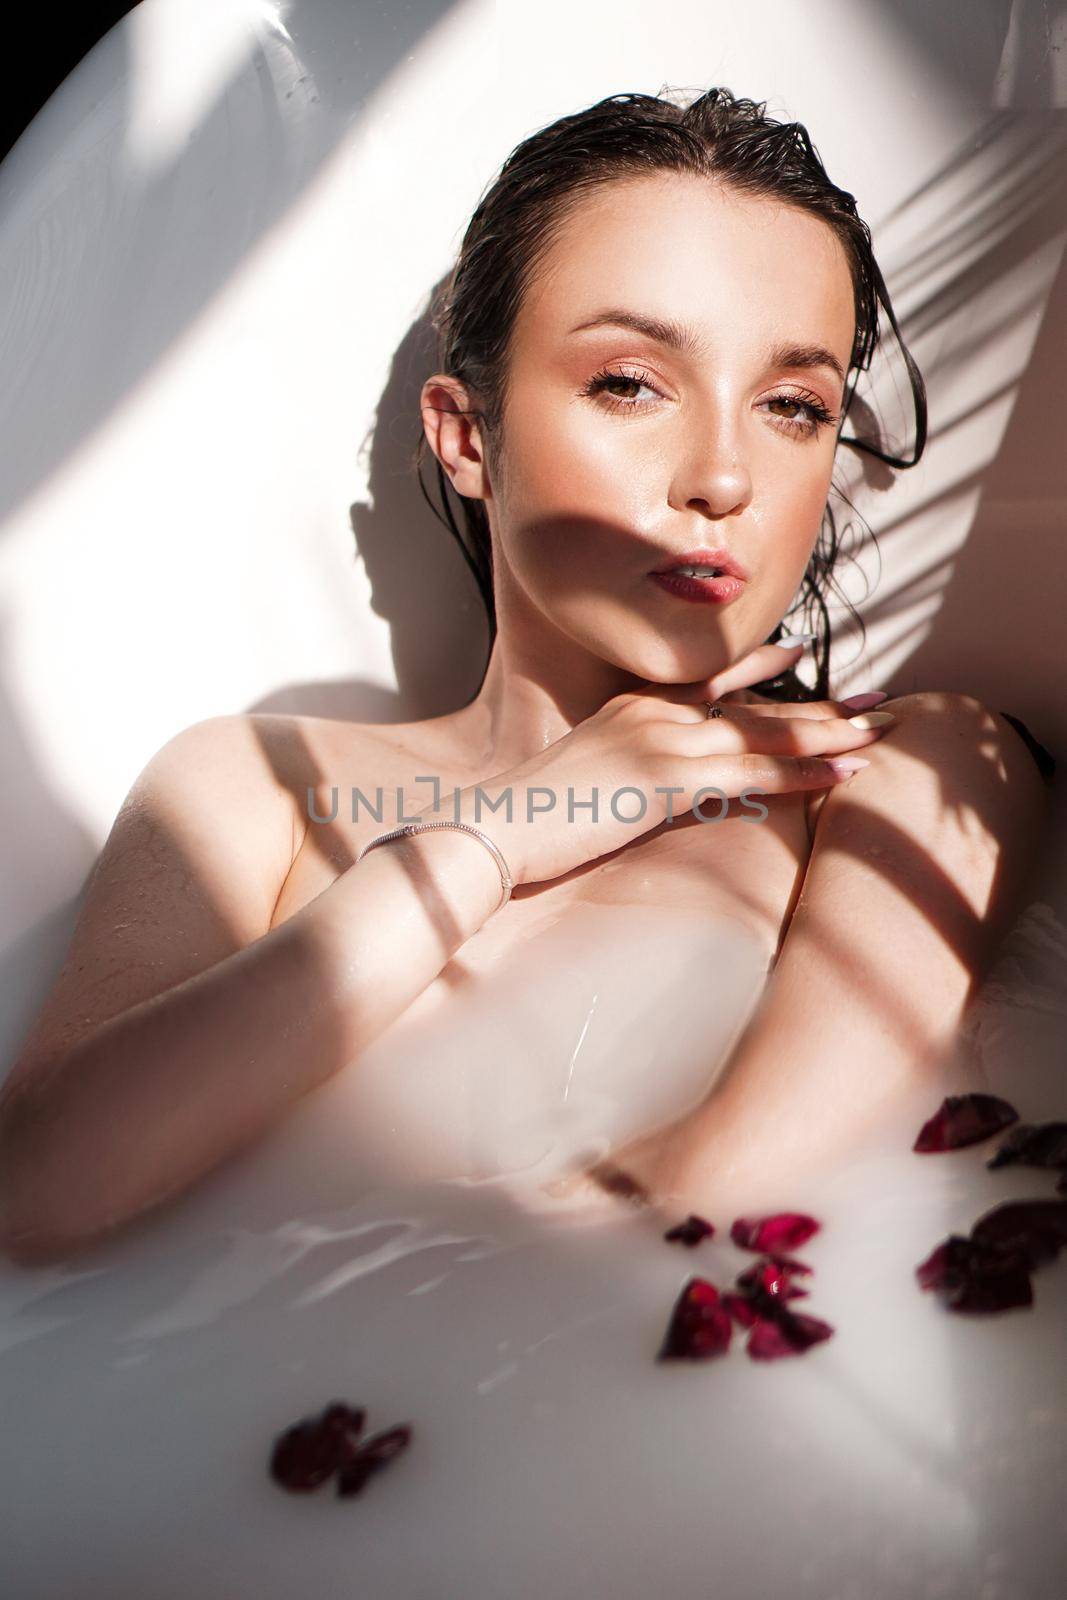 An Attractive girl relaxing in bath with petals on light background - fashion portrait